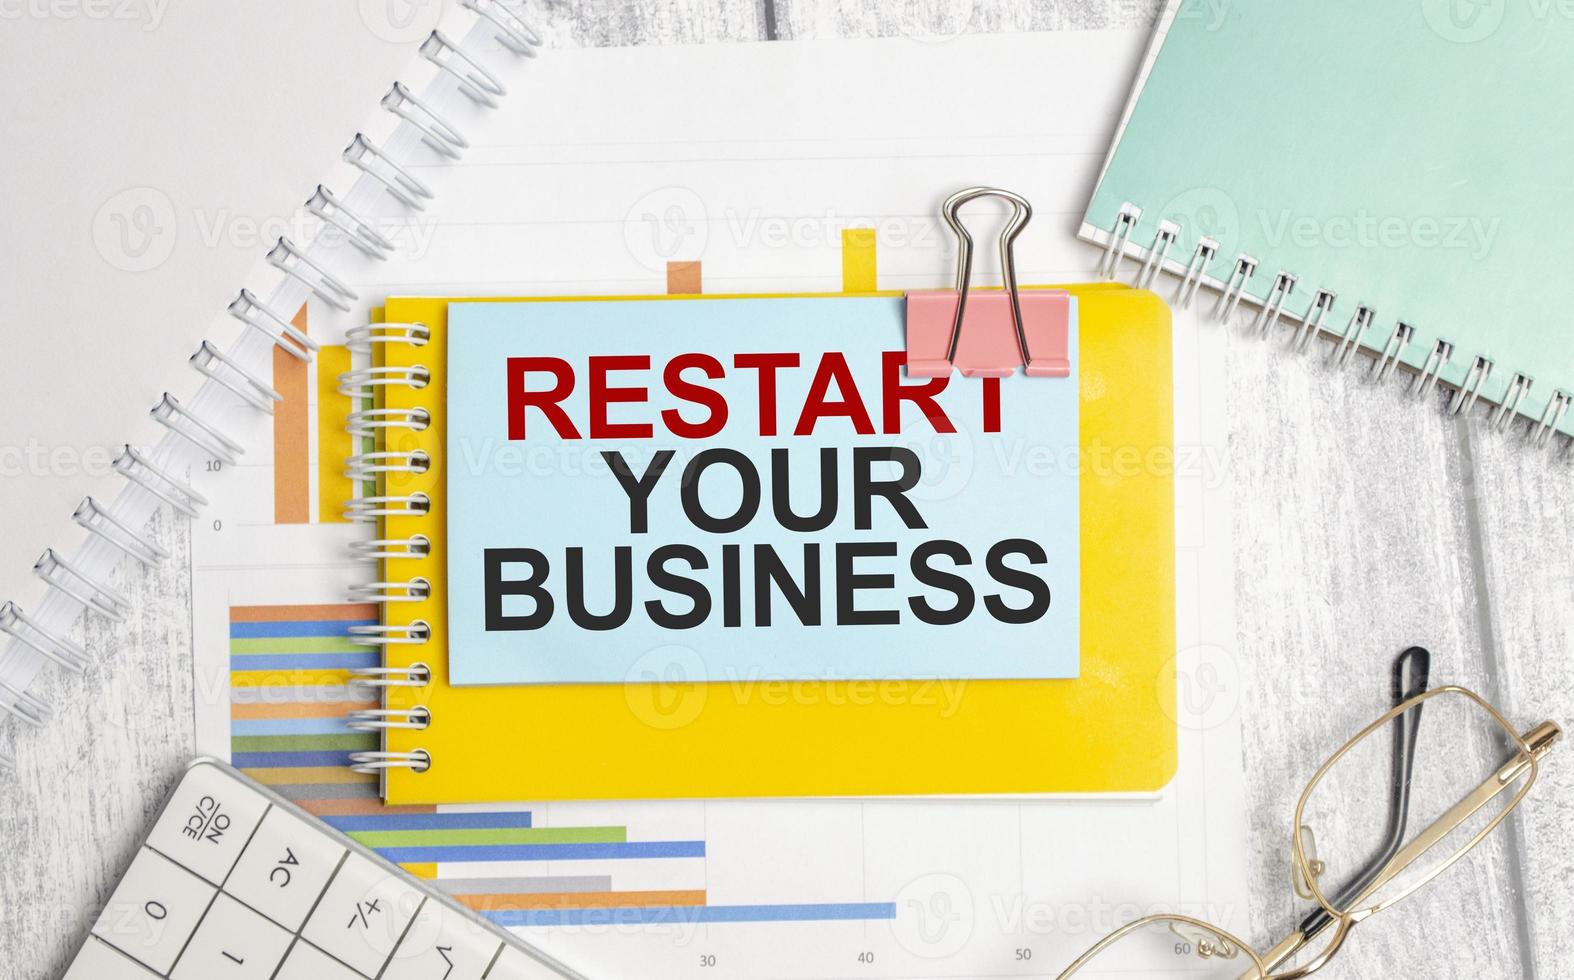 restart your business words on blue sticker with glasses photo